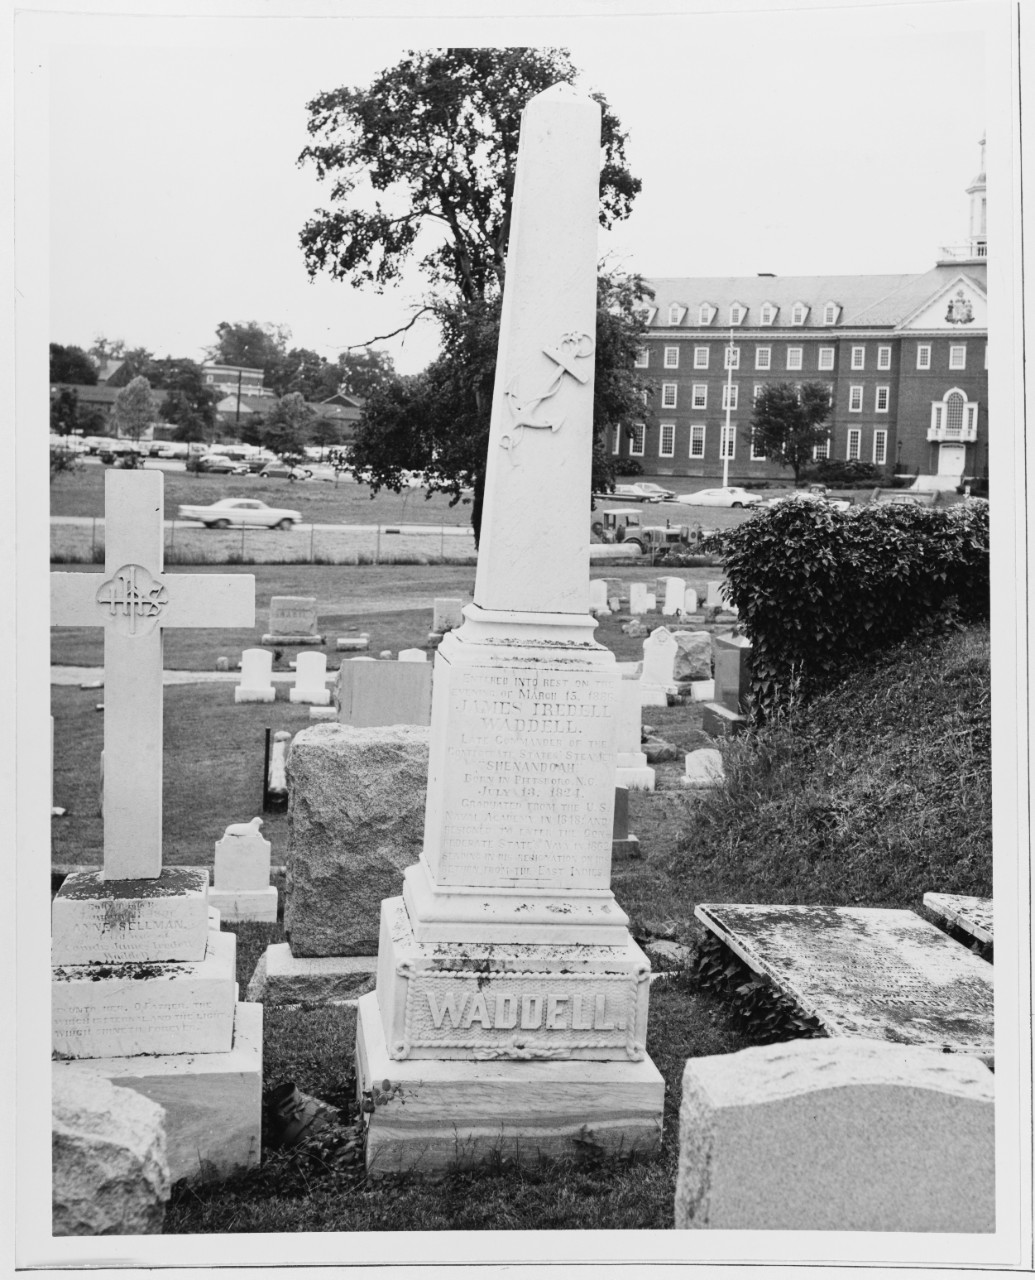 Monument to James Waddell in St. Anne's Cemetery in Annapolis, Maryland, June, 1965